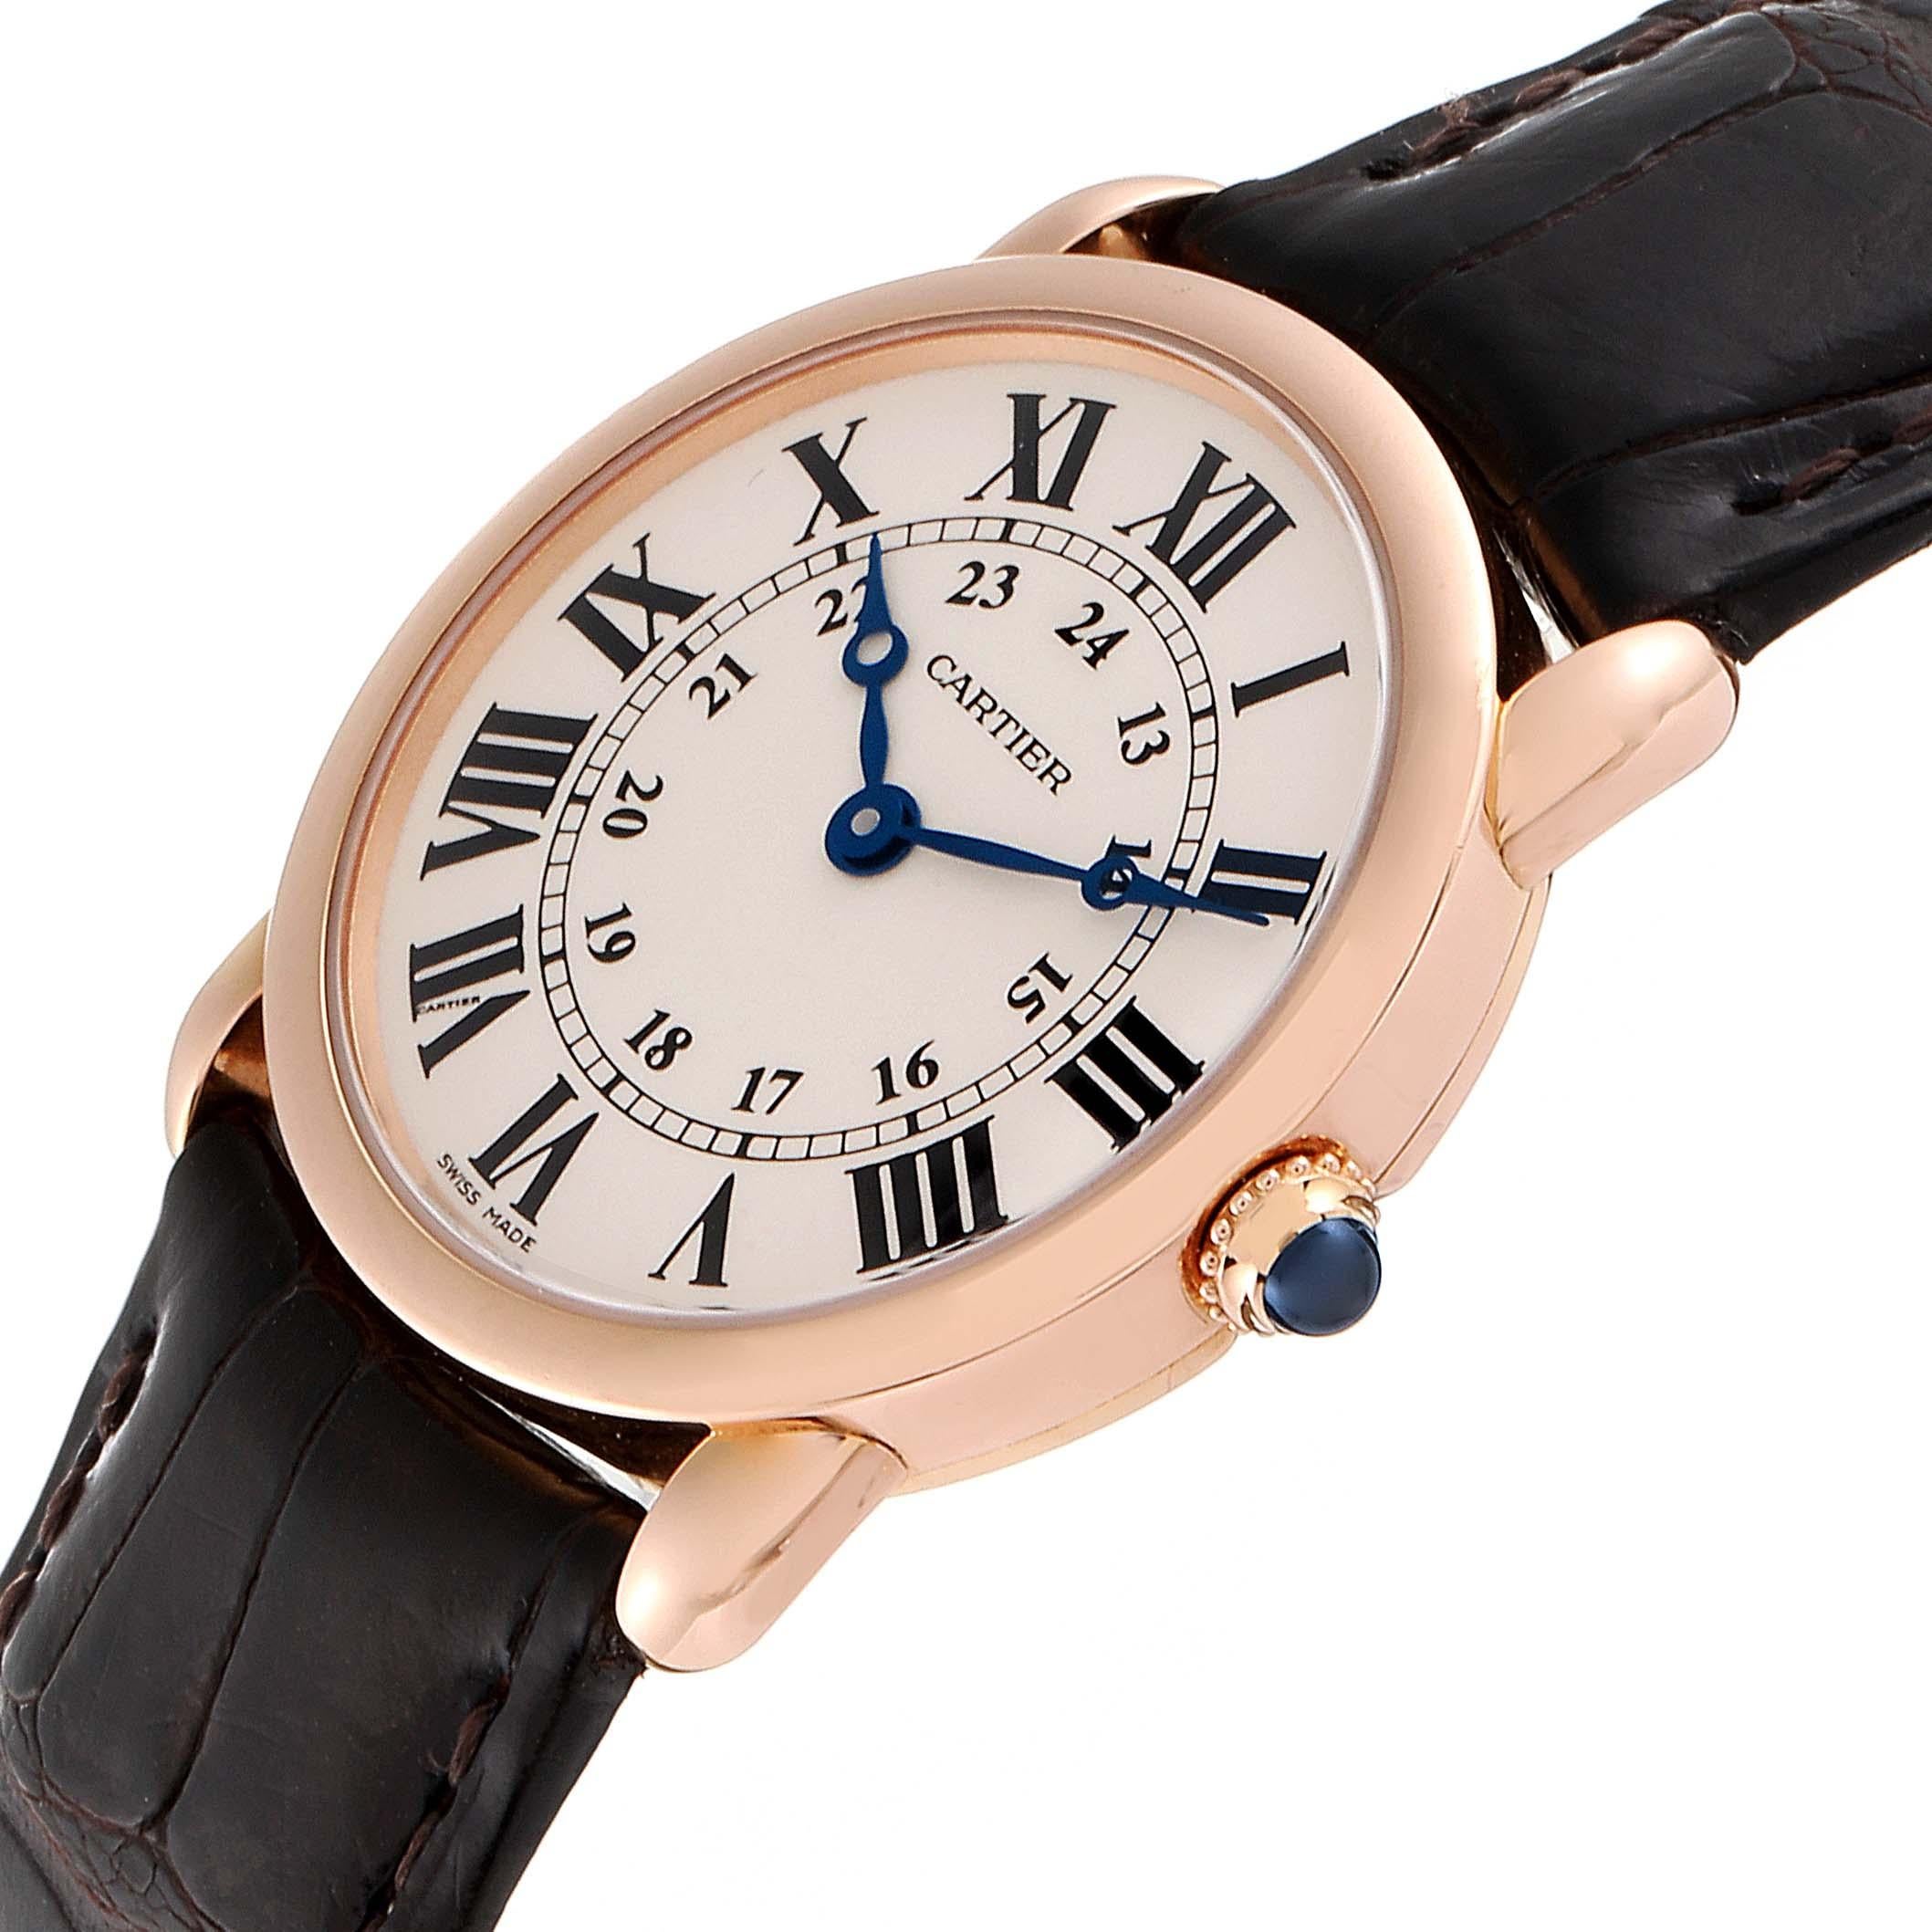 Cartier Ronde Louis Rose Gold Small Ladies Watch W6800151 Box Papers In Excellent Condition For Sale In Atlanta, GA